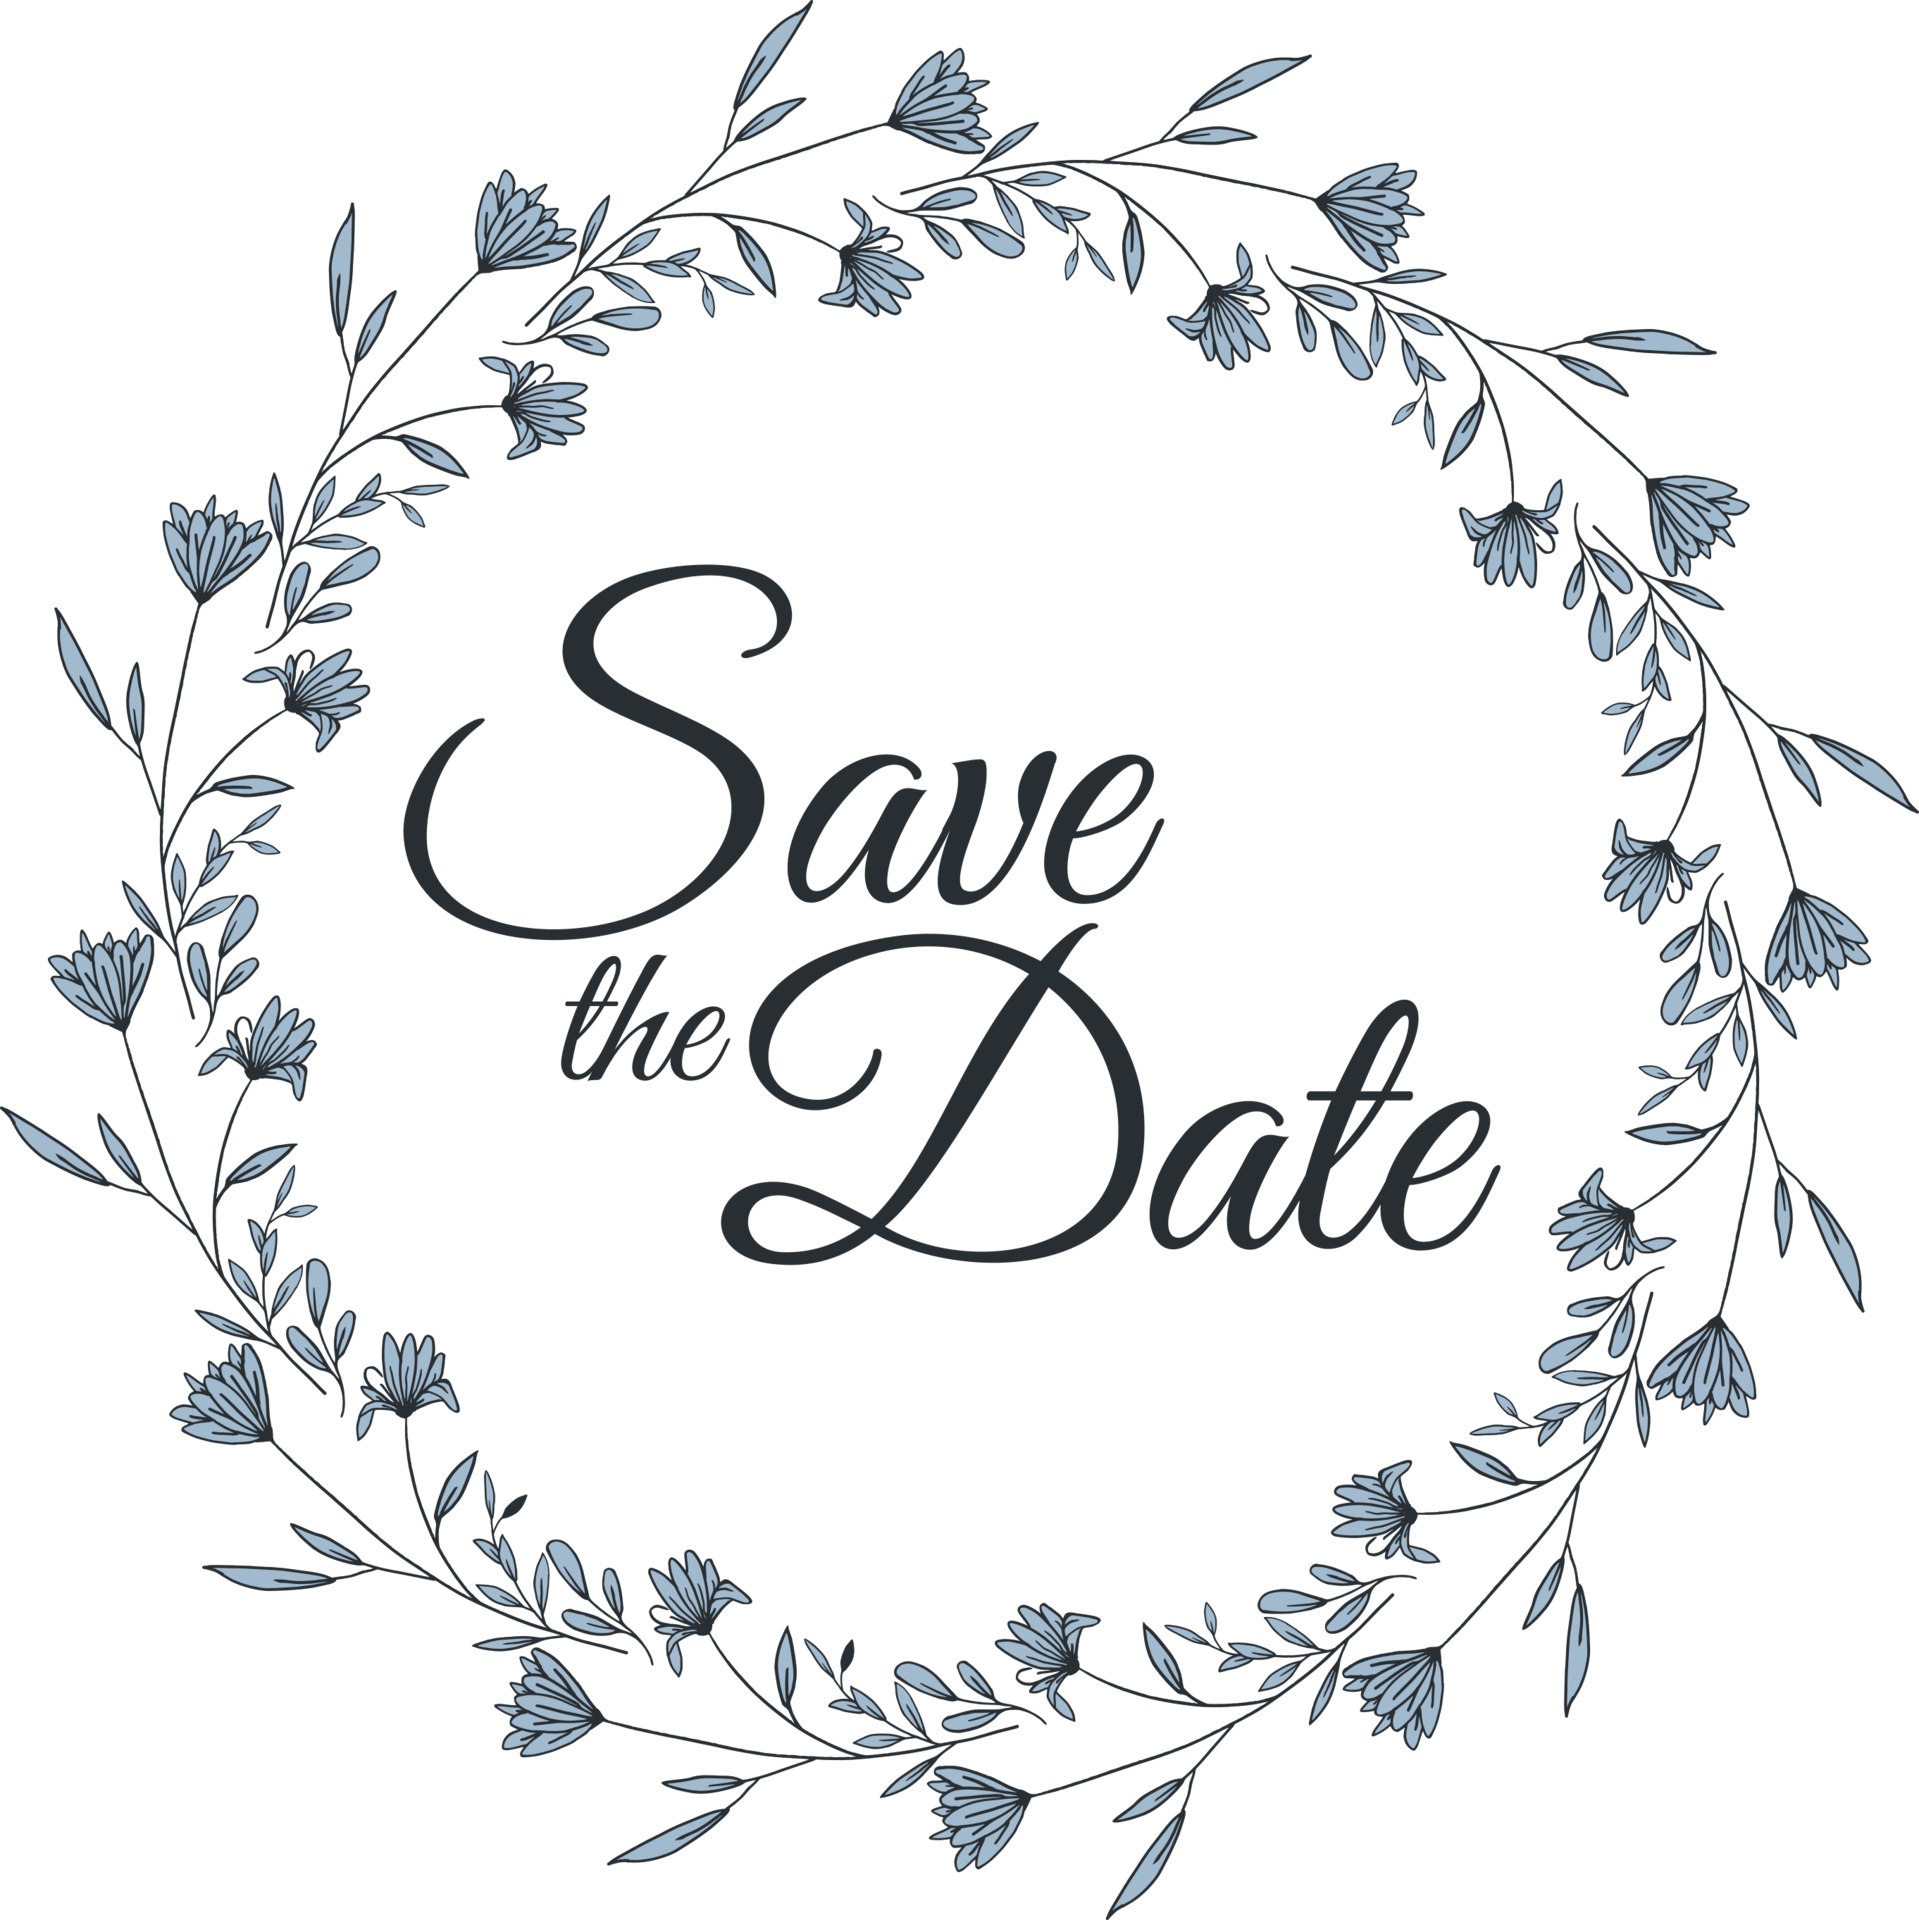 Save The Date Pngs For Free Download